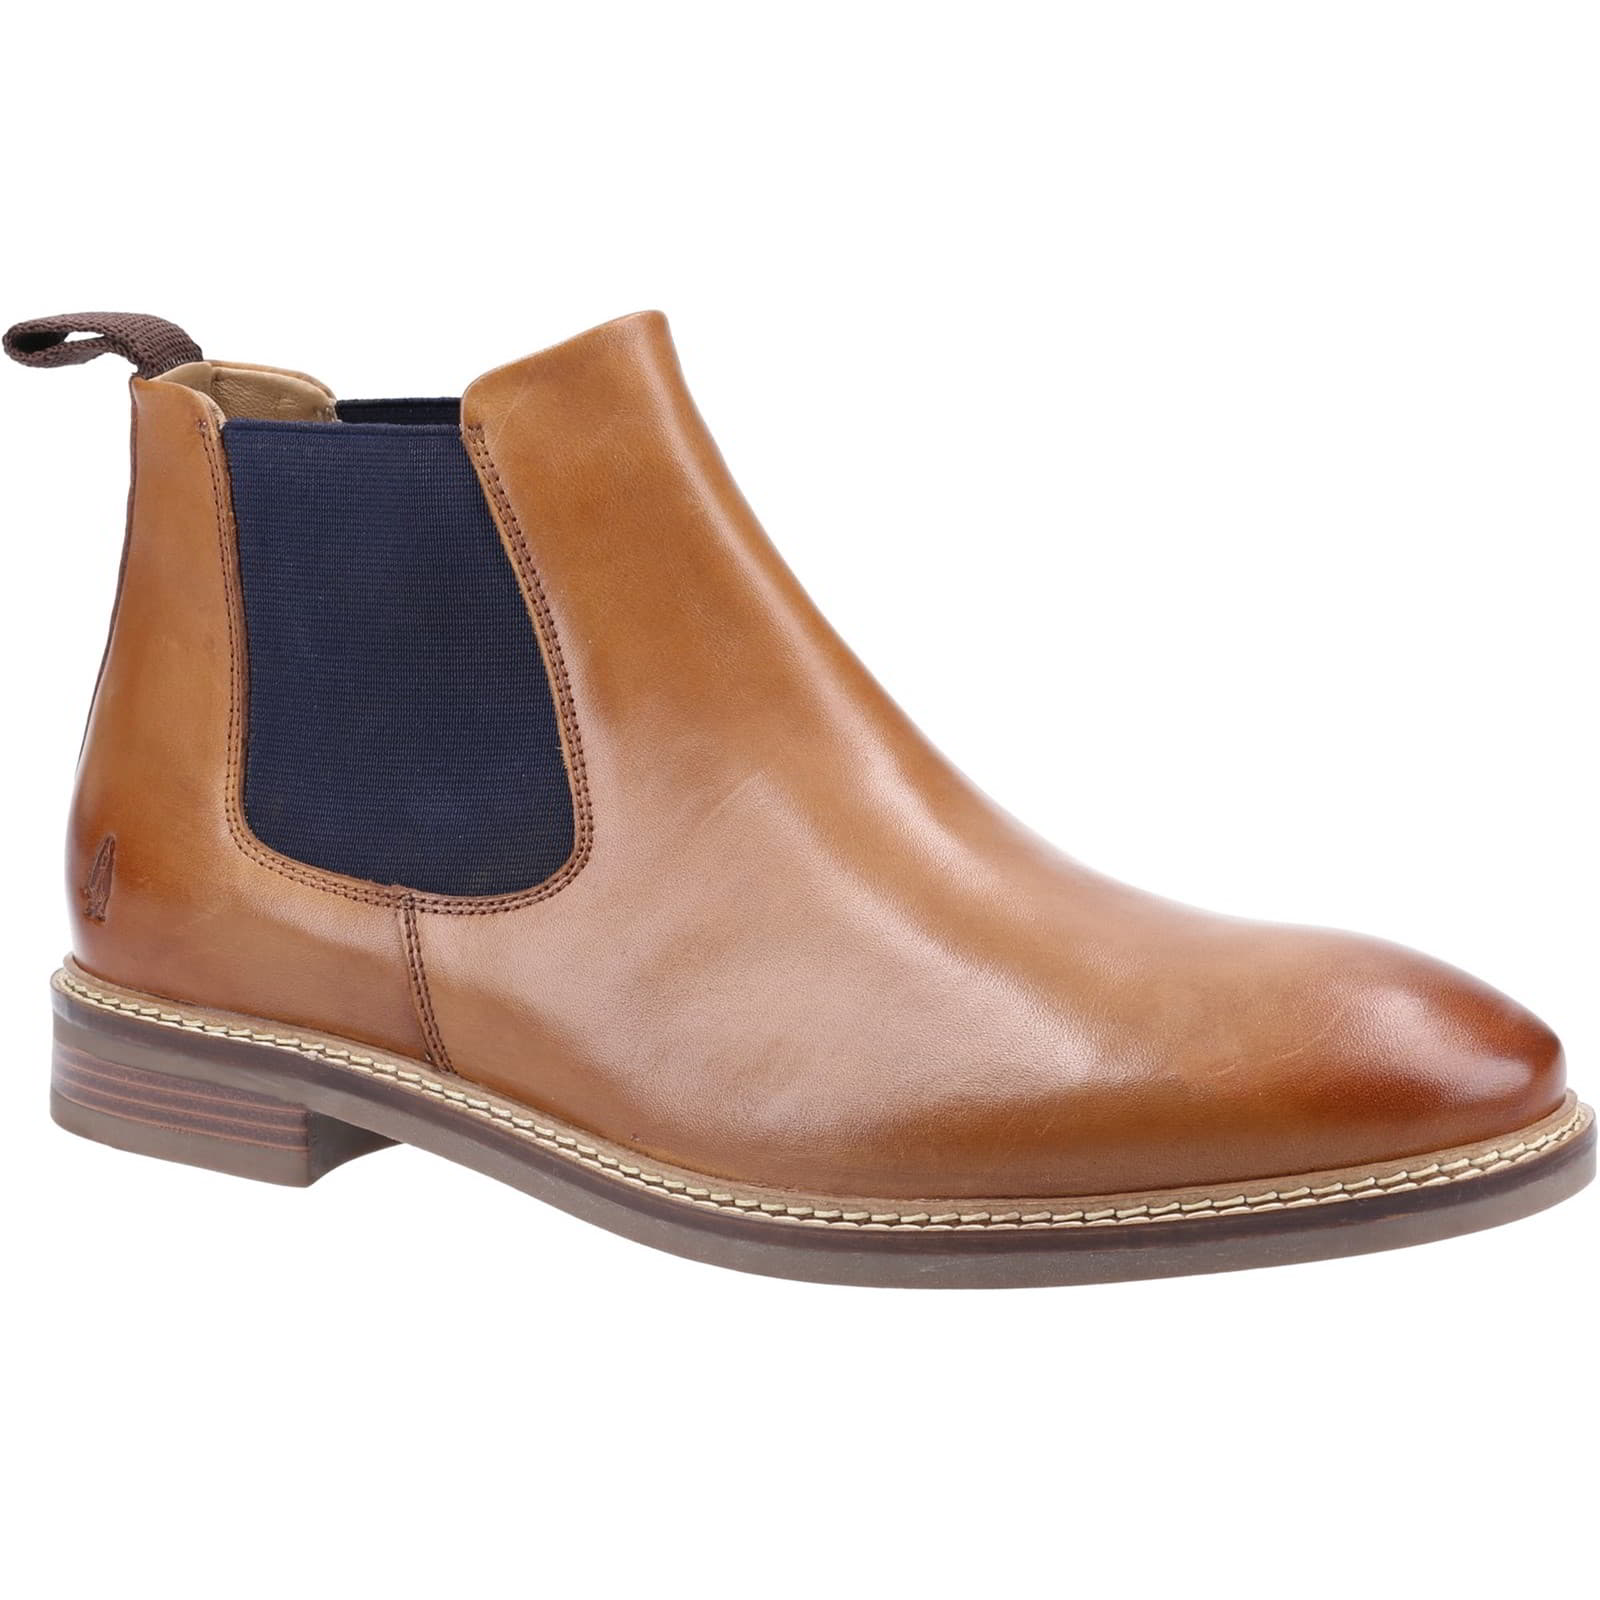 Hush Puppies Men's Blake Pull On Chelsea Ankle Boots - UK 8